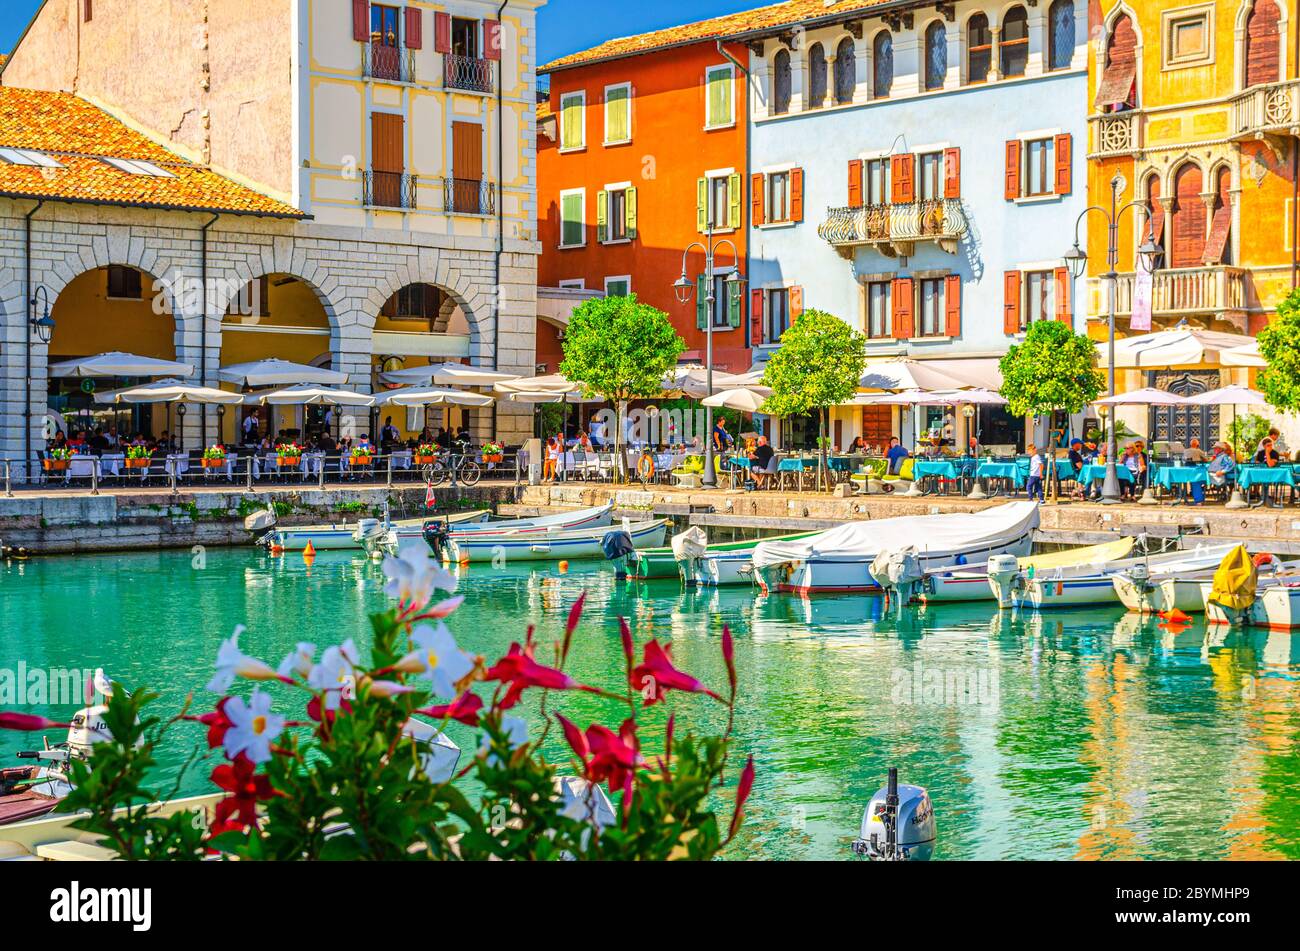 Desenzano del Garda, Italy, September 11, 2019: Old harbour Porto Vecchio with boats on turquoise water, street restaurants and traditional buildings in historical town centre, Lombardy Stock Photo